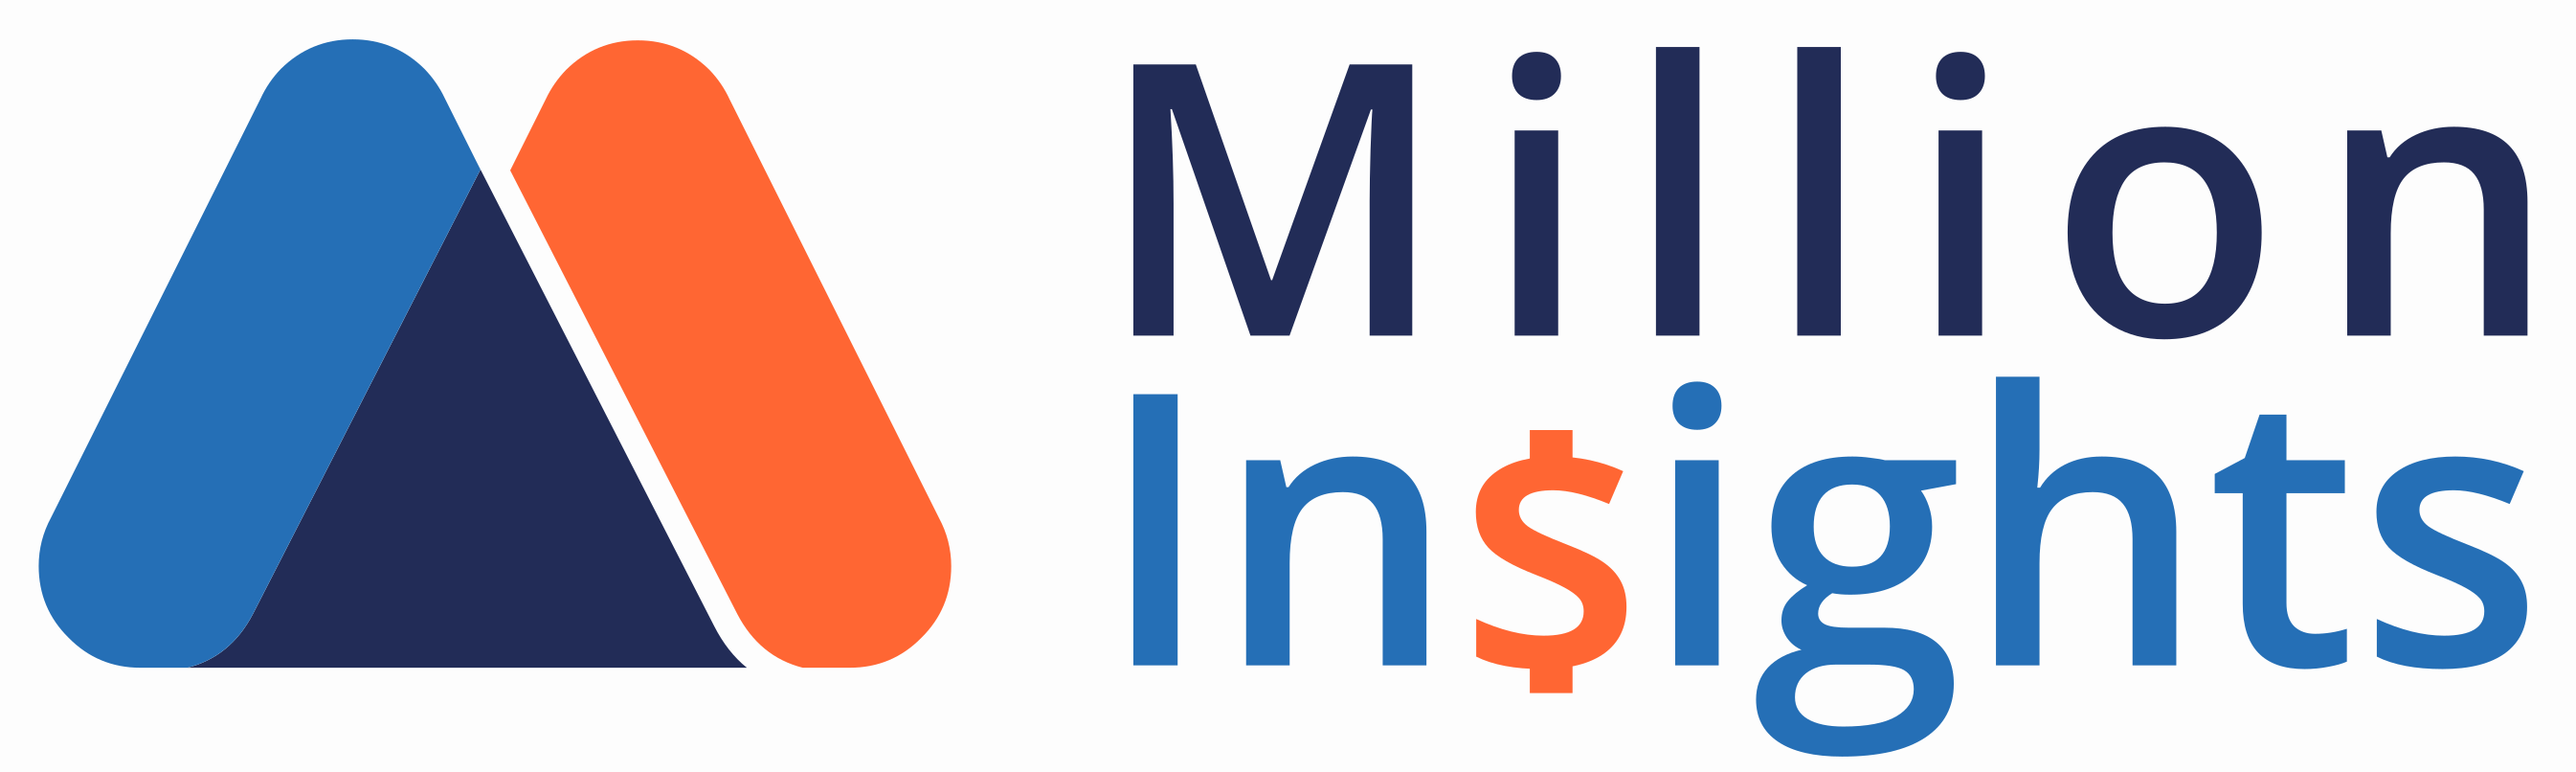 Integration Platform as a Service Market Is Predicted To Register Enormous Growth By 2024 - Competitive Landscape, Service Estimates & Global Trend Analysis | Million Insights